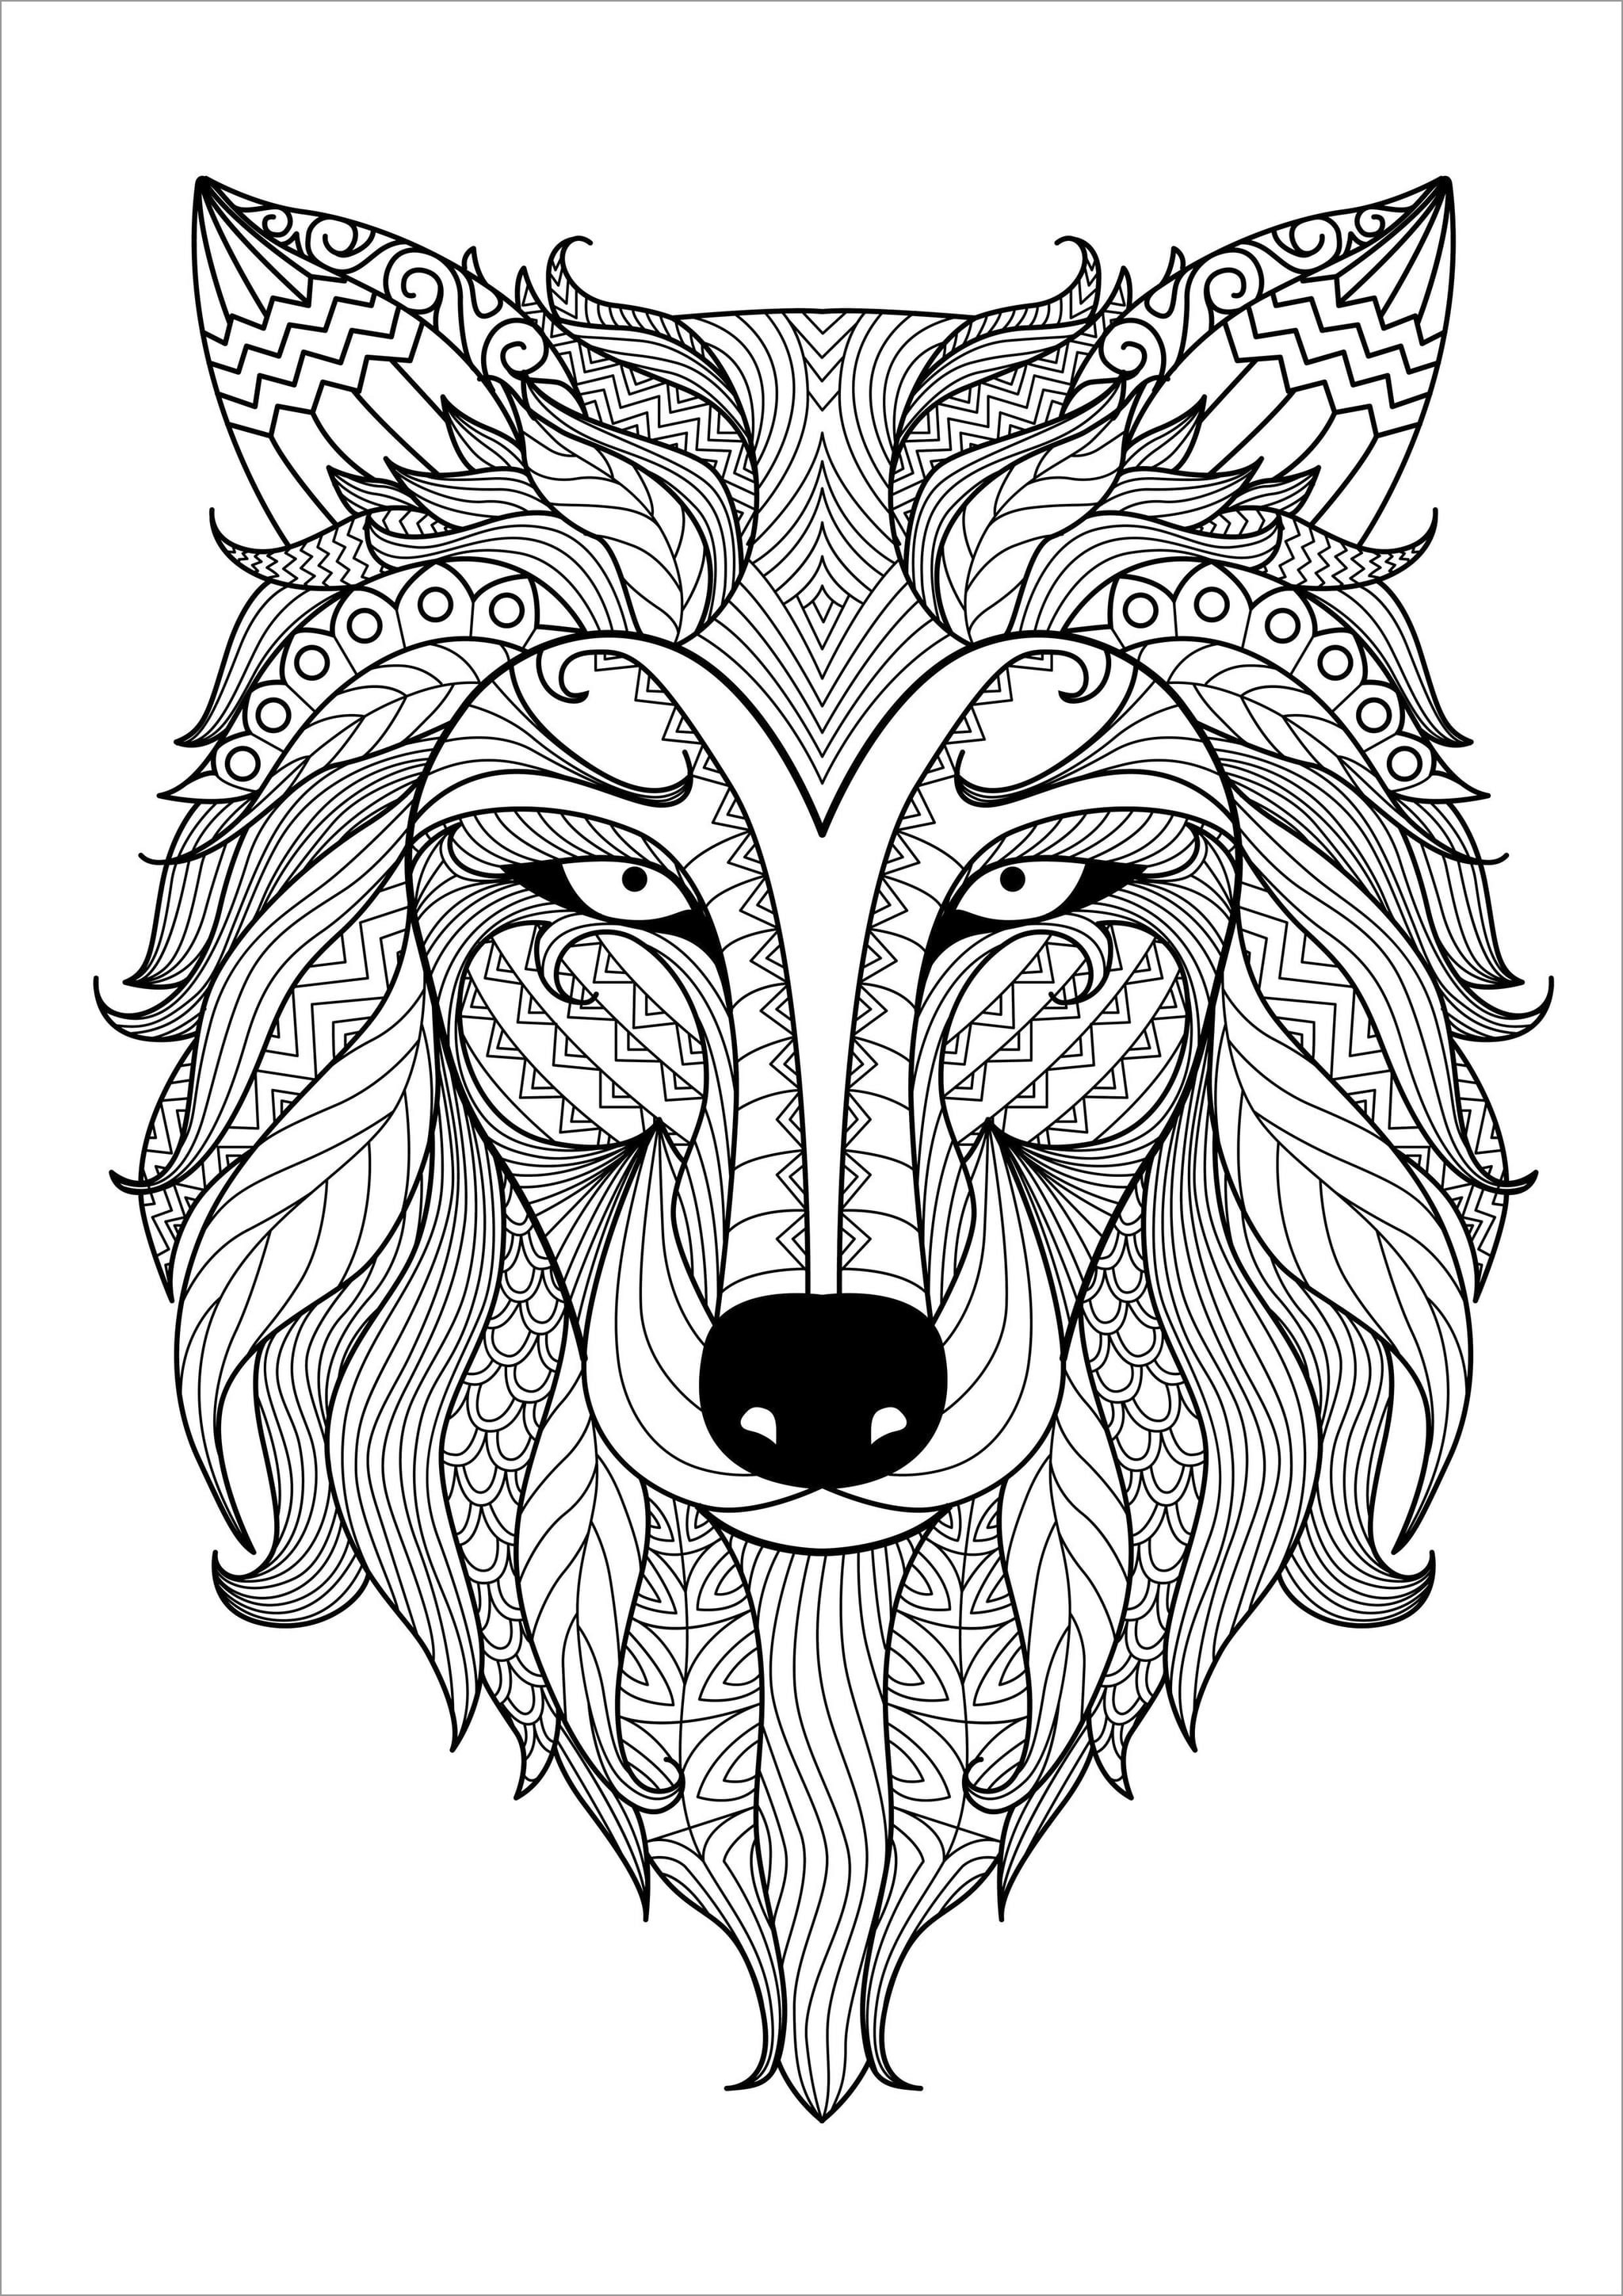 Wolf Head Mandala Coloring Page for Adult